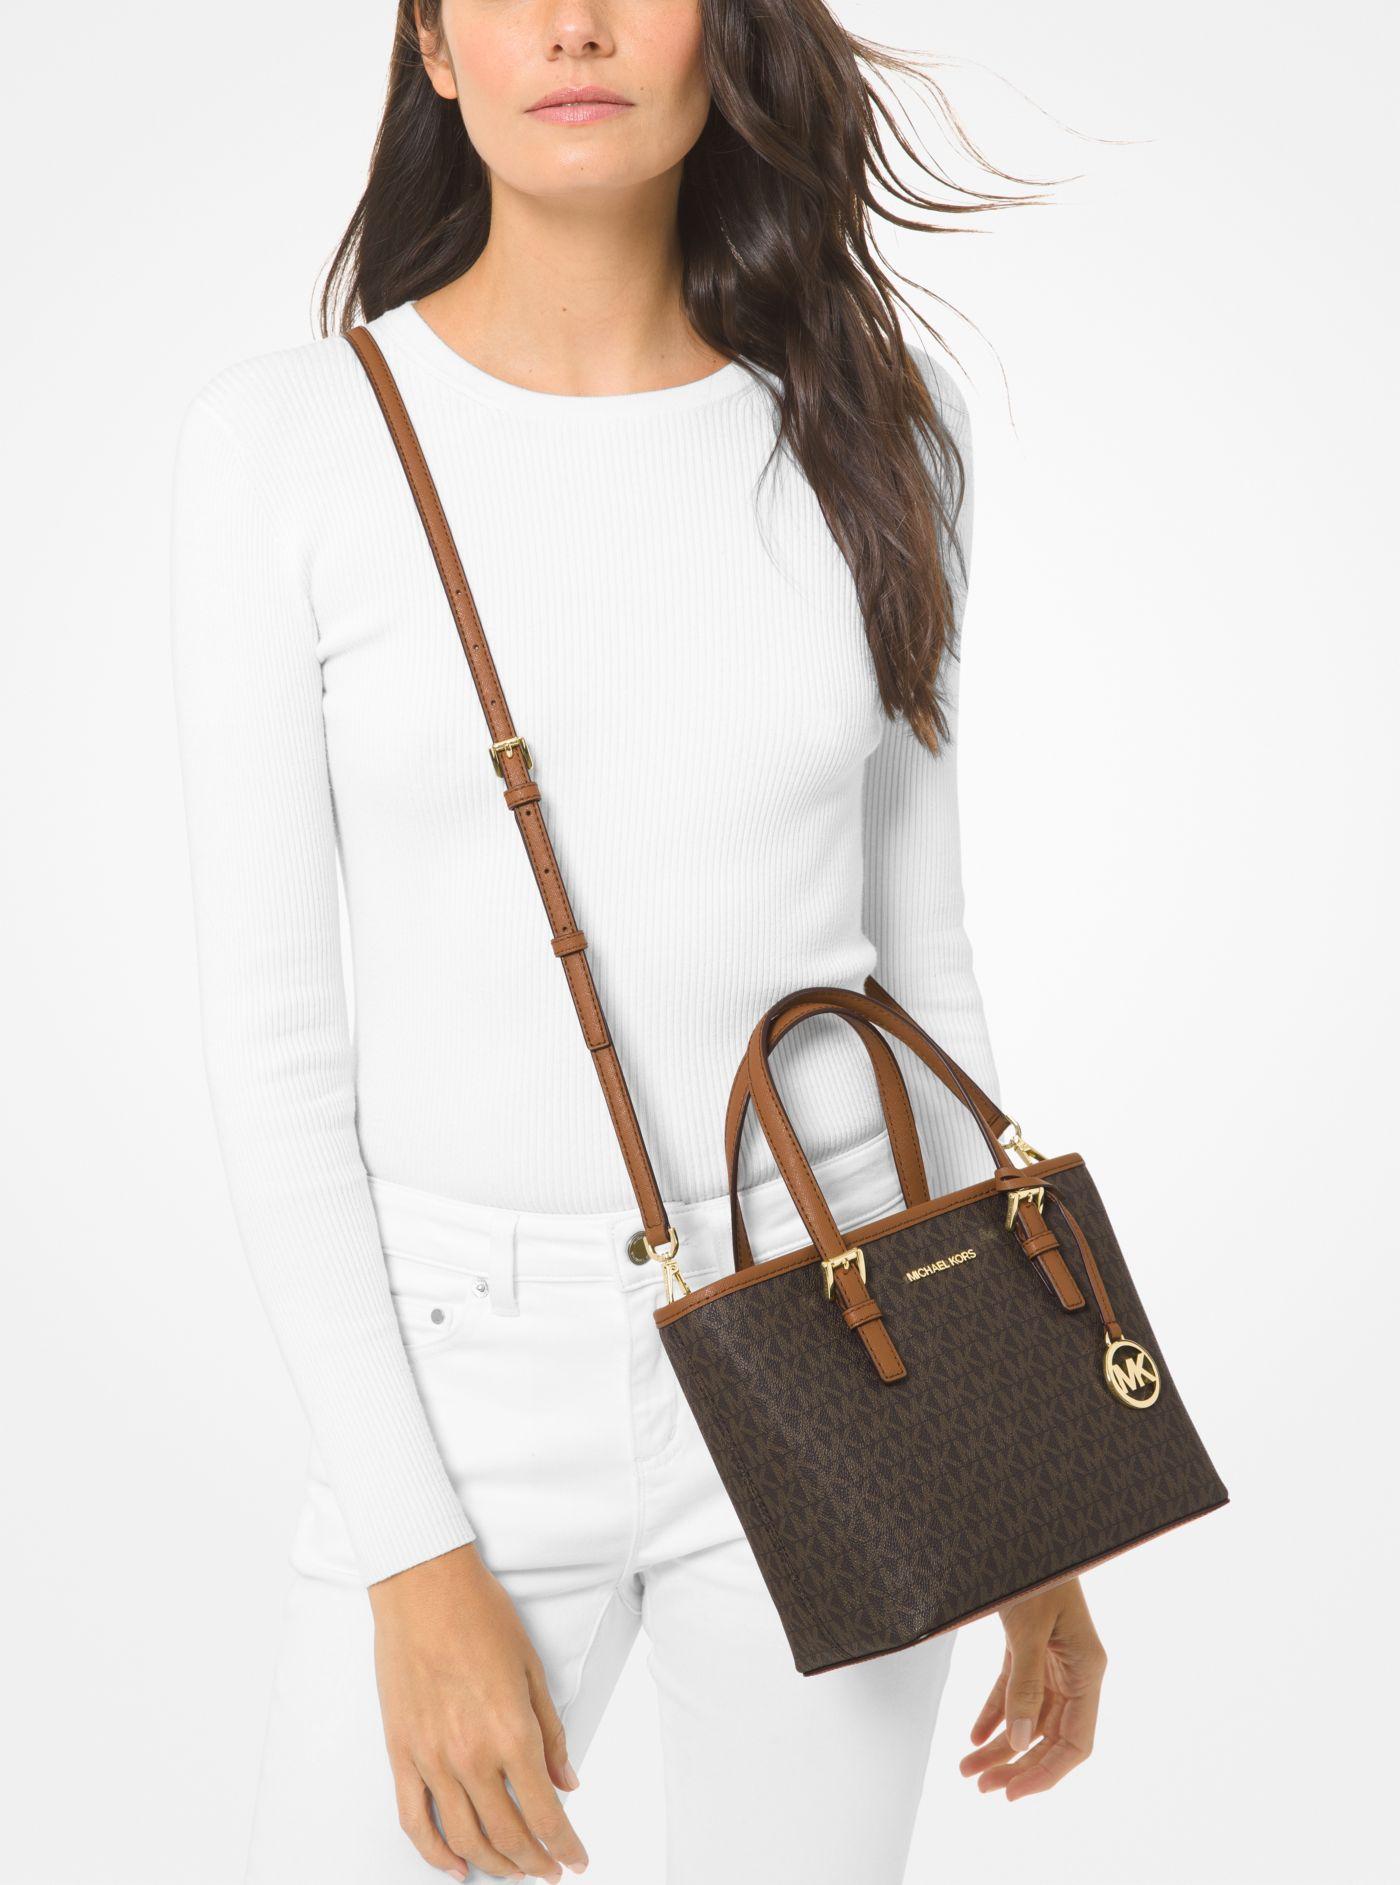 Michael Kors Canvas Jet Set Travel Extra-small Logo Top-zip Tote Bag in  Brown | Lyst